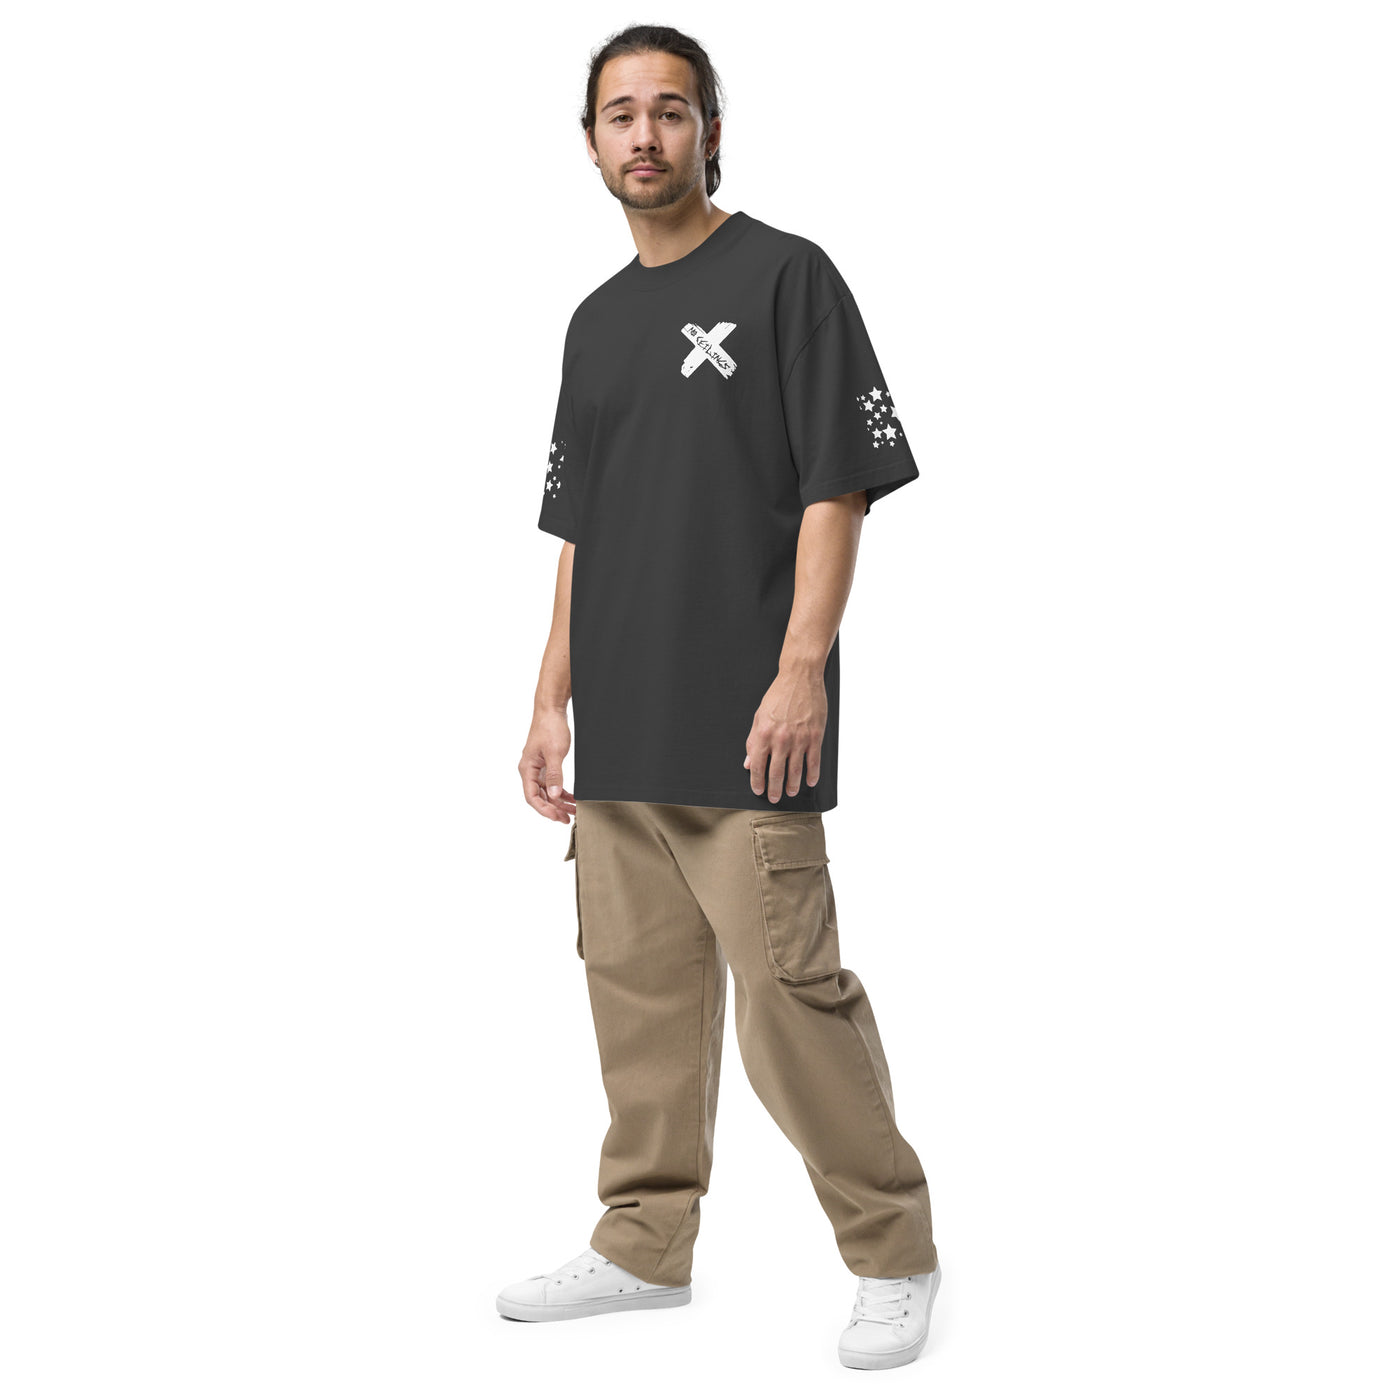 X's and stars Oversized faded t-shirt